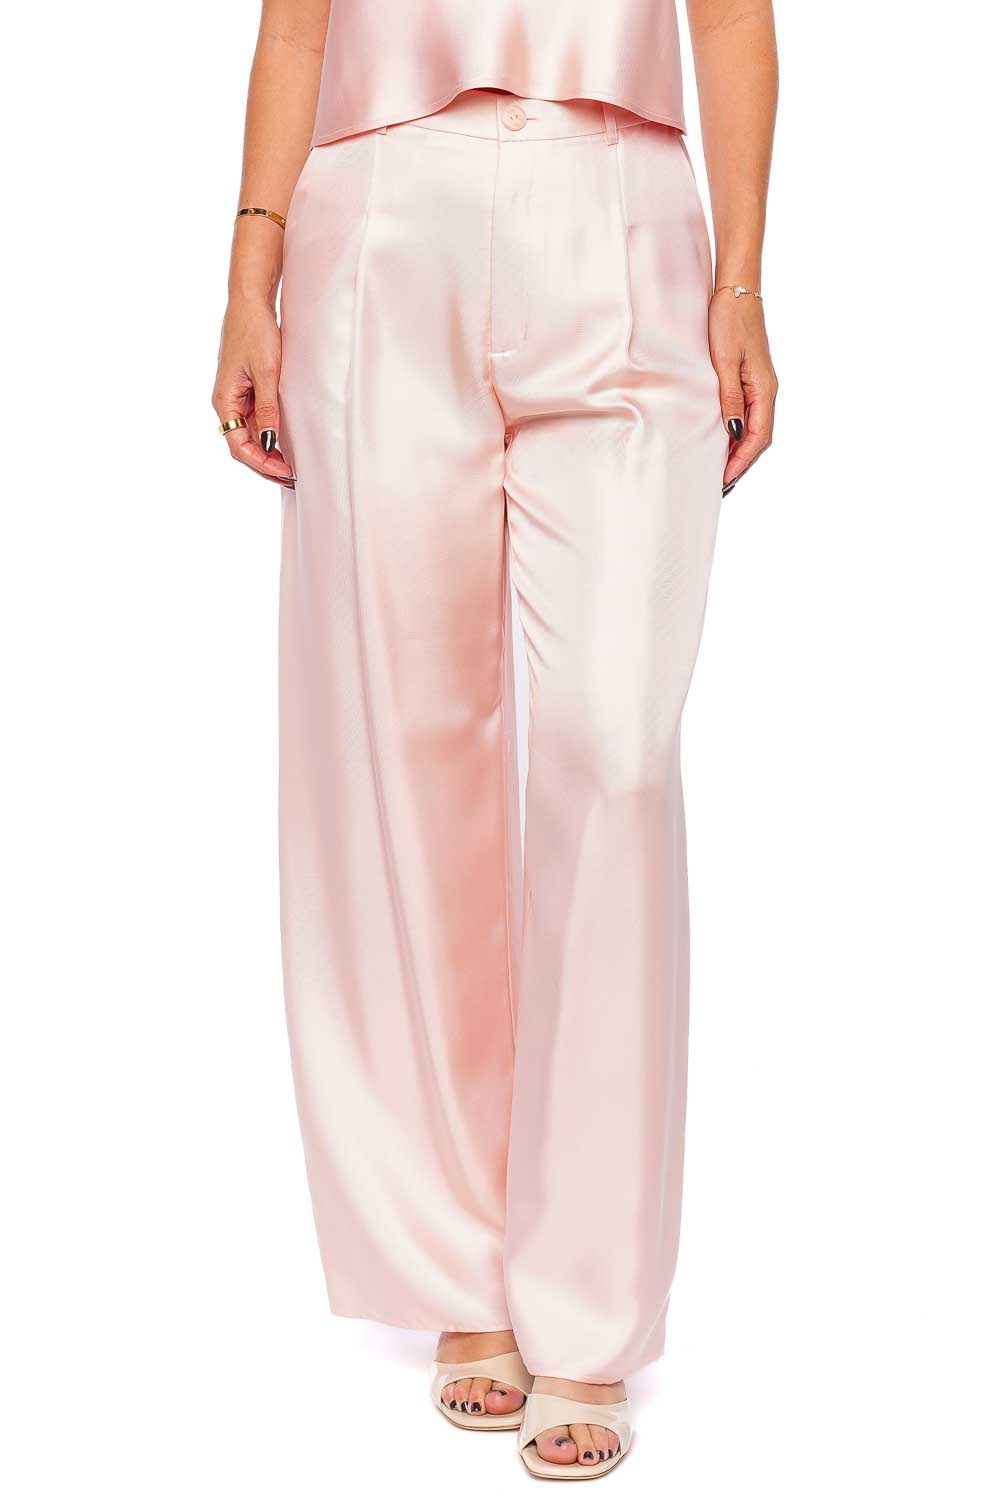 LAPOINTE Light Pink Silky Twill Pleated Pant